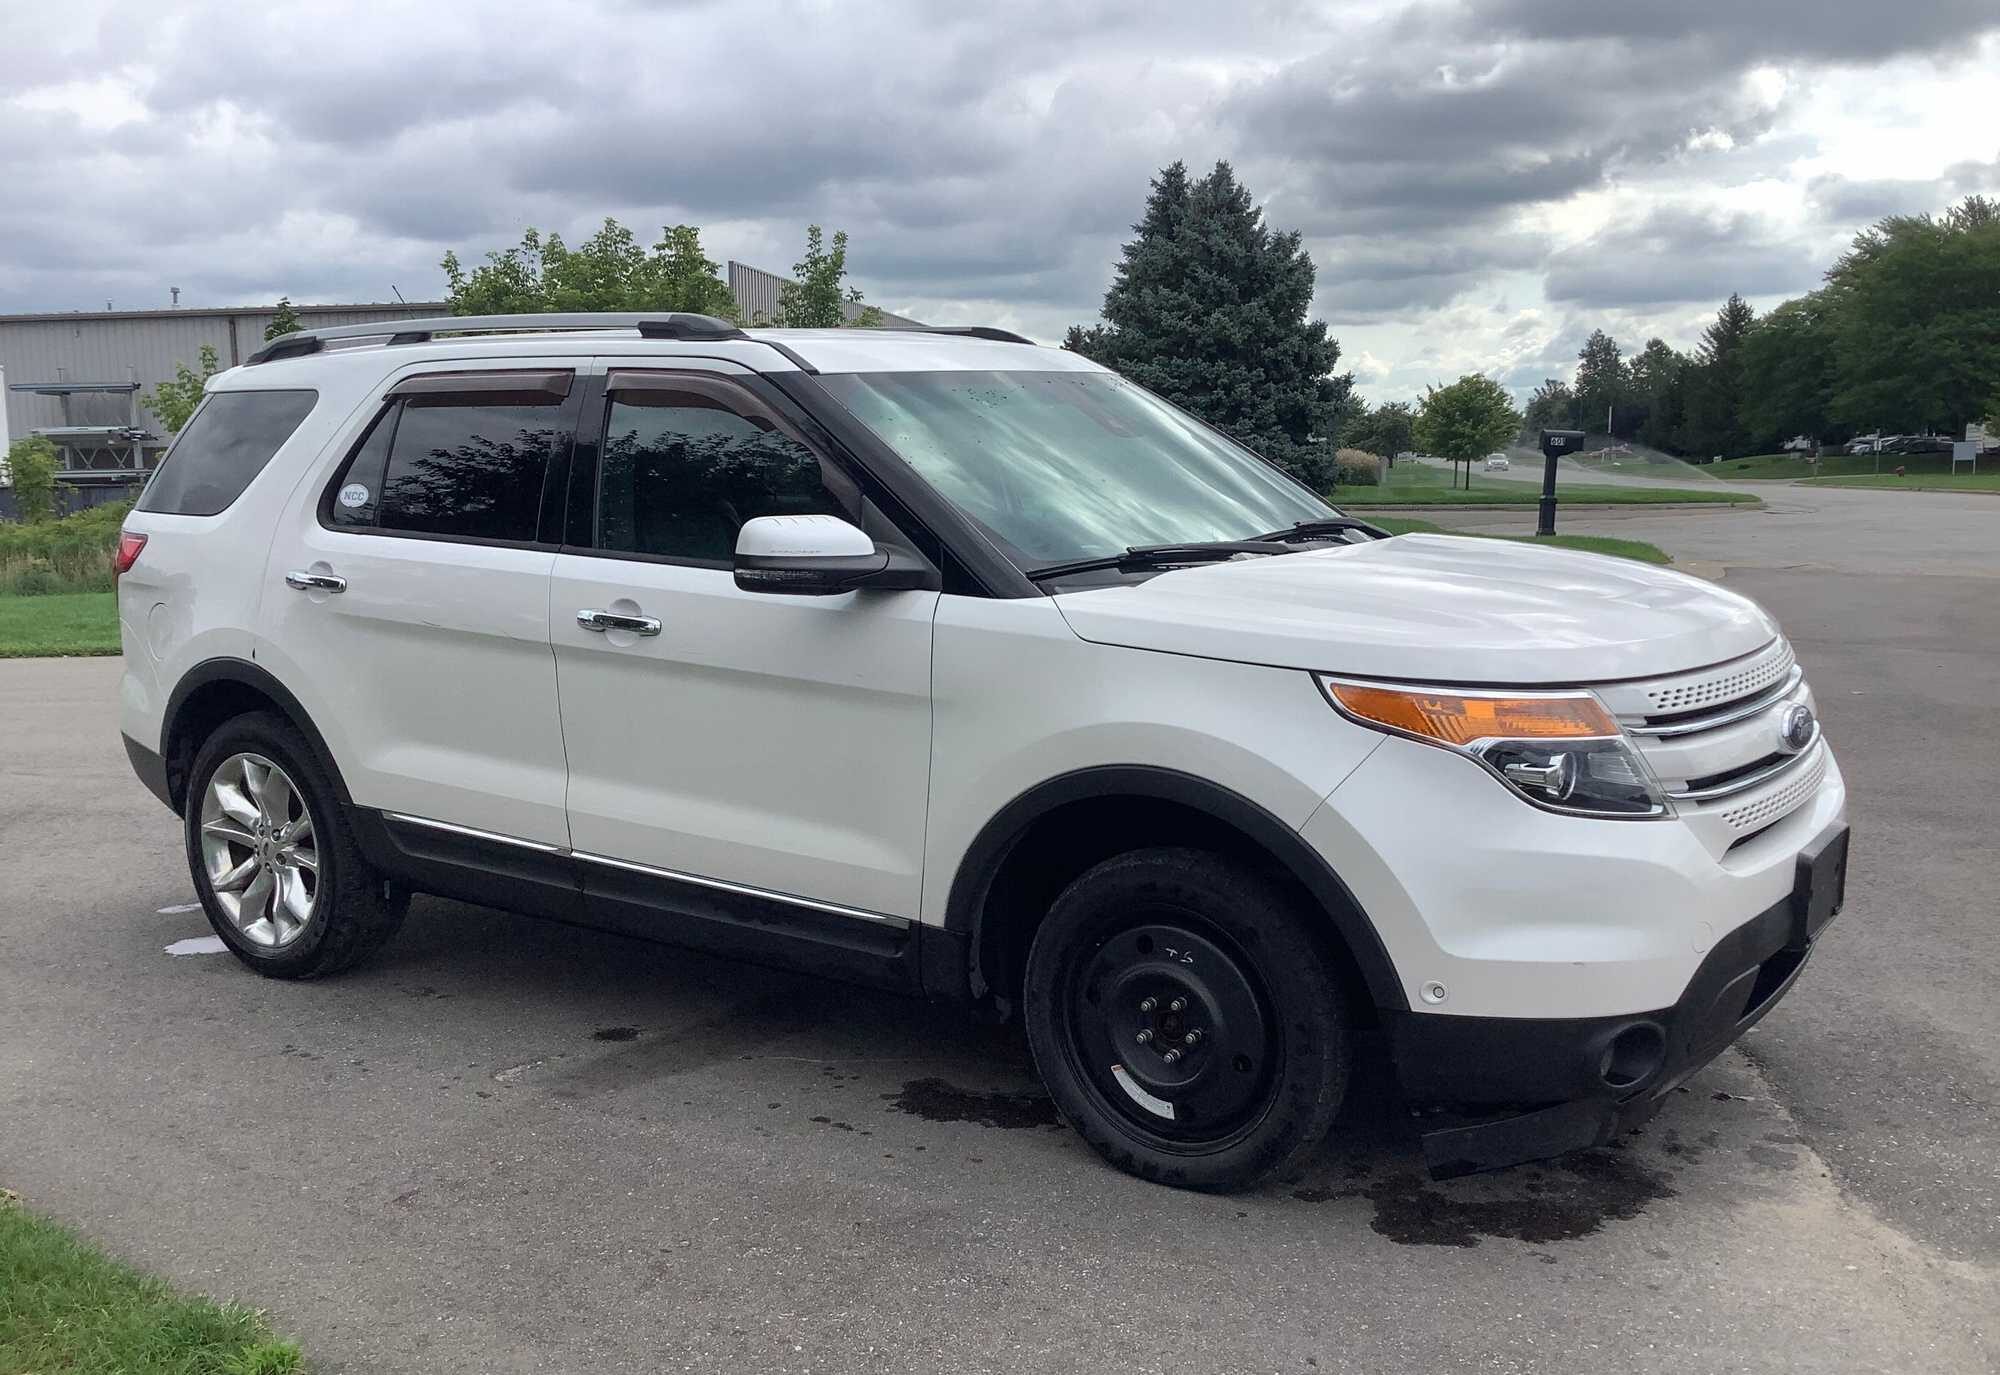 2013 Ford Explorer Limited 4WD 4 Door SUV